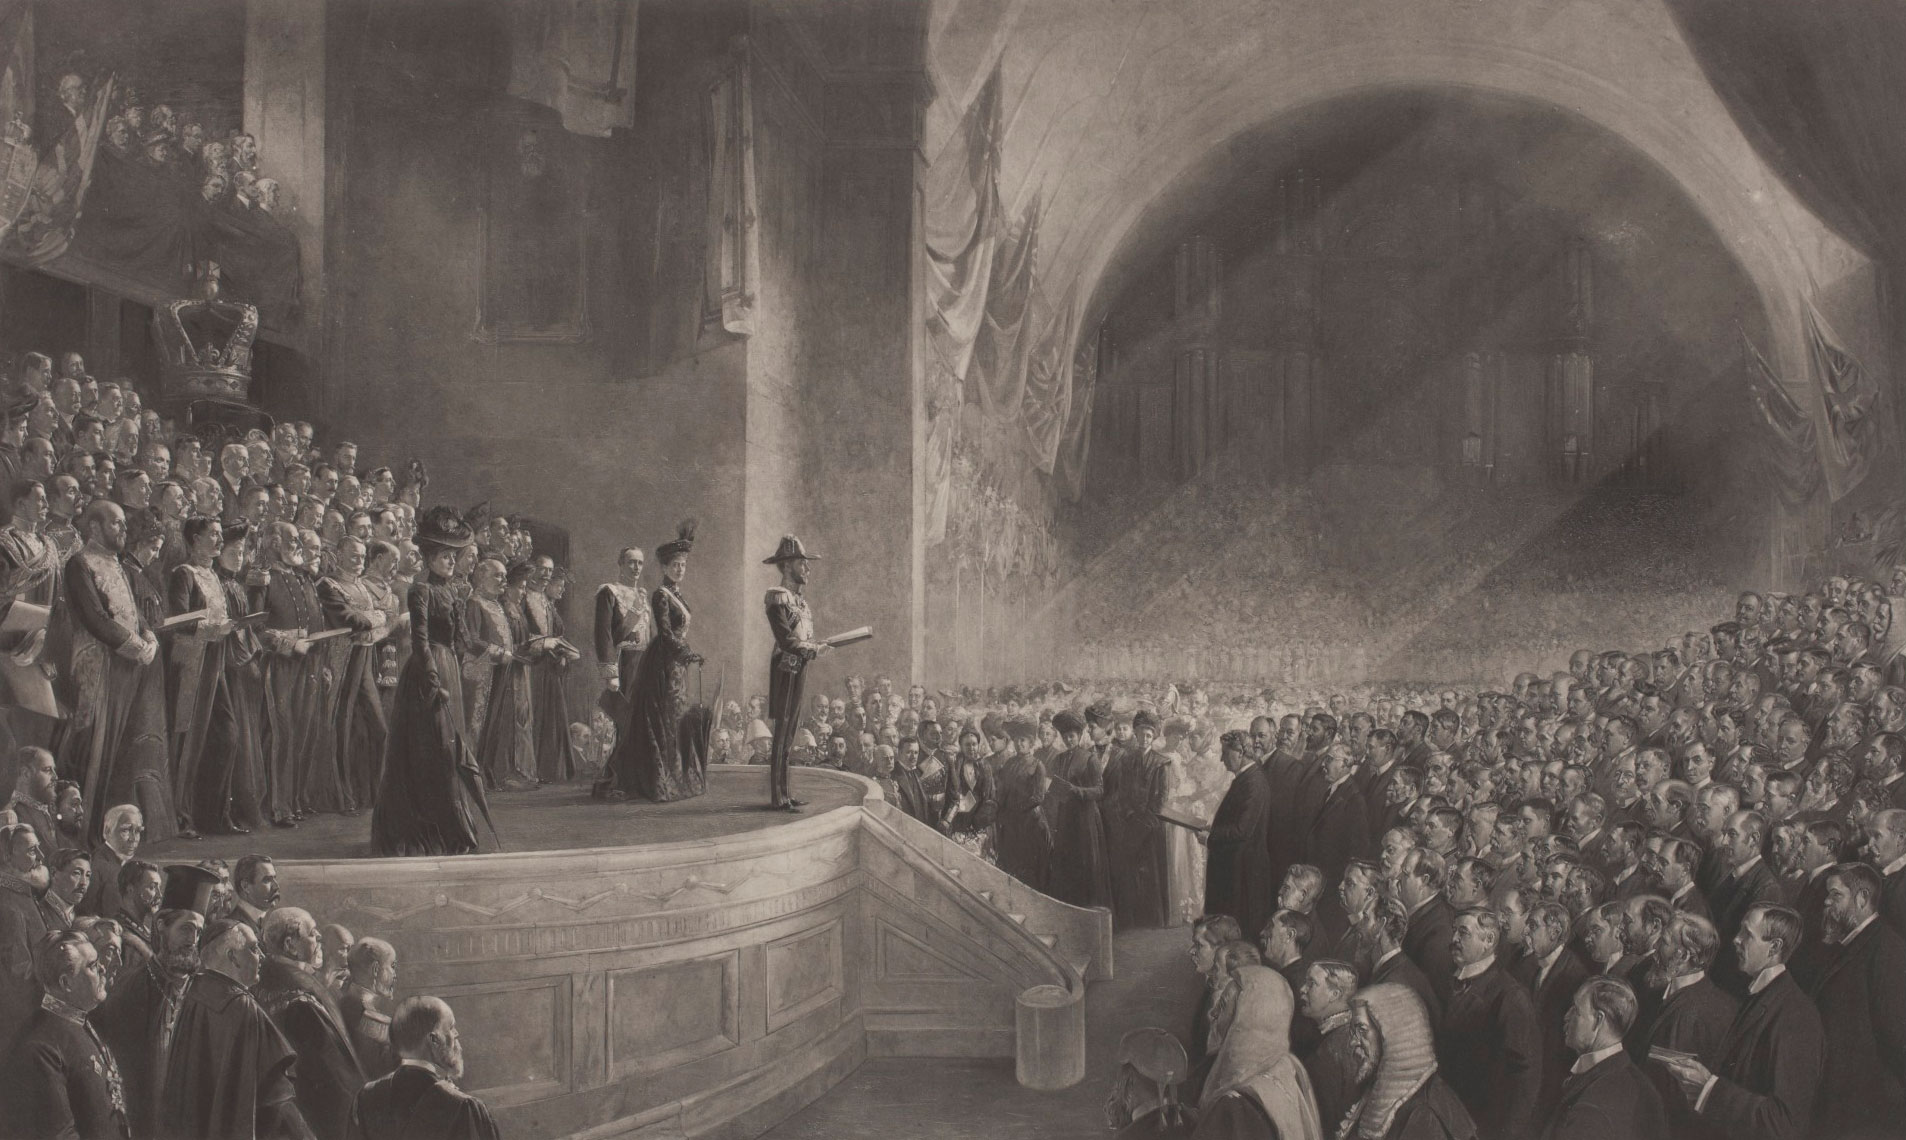 Opening of the First Parliament of the Commonwealth of Australia by HRH The Duke of Cornwall and York (Later HM King George V), May 9, 1901, by Tom Roberts